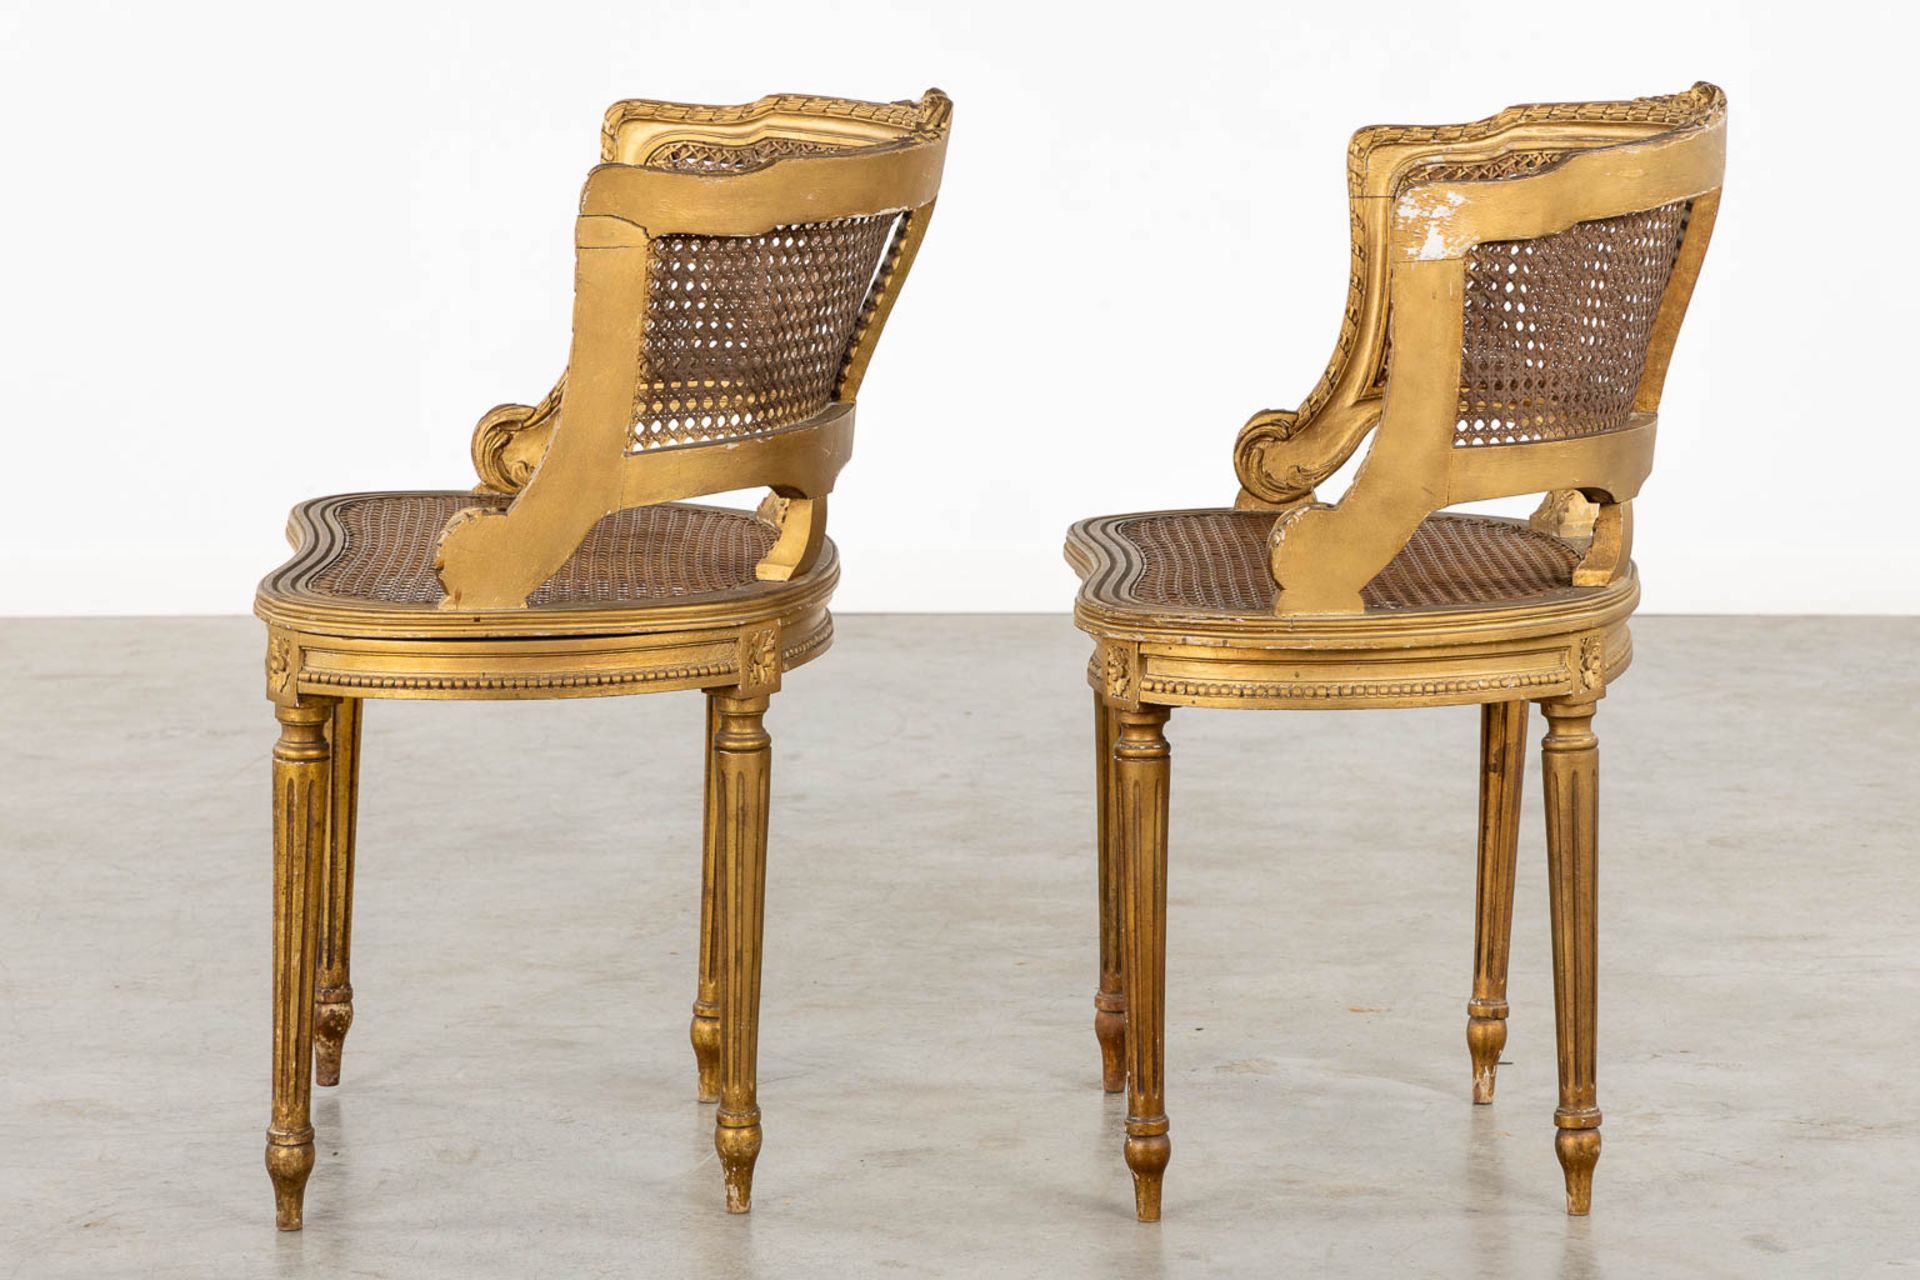 Two side tables, Two chairs, sculptured wood in Louis XVI style. Circa 1900. (L:57 x W:81 x H:75 cm) - Bild 14 aus 18